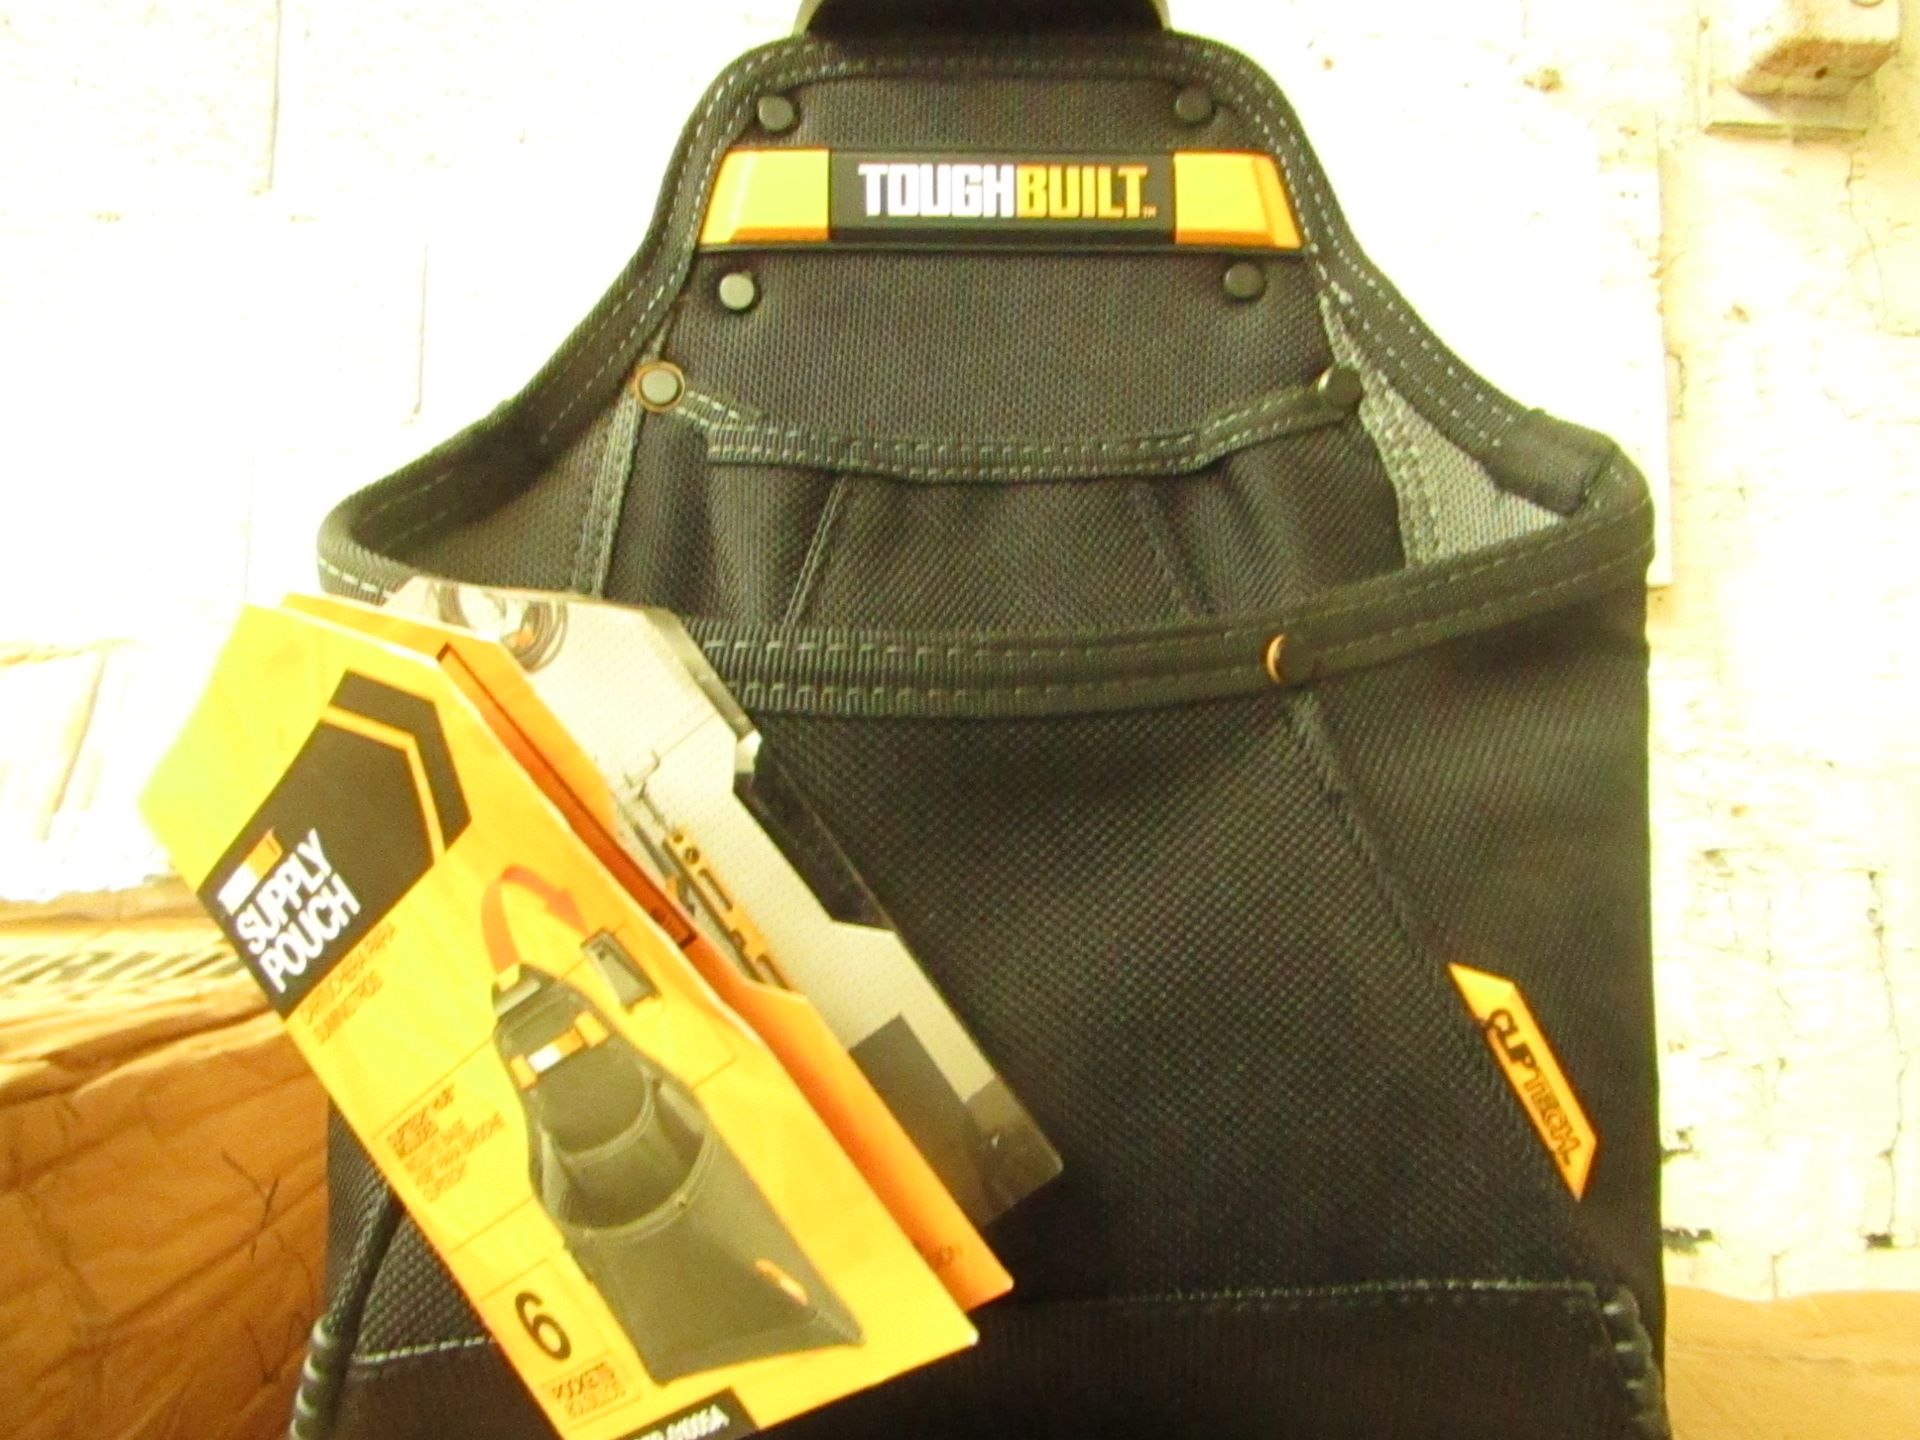 2x toughbuilt supply pouch - new & boxed - RRP £42 each